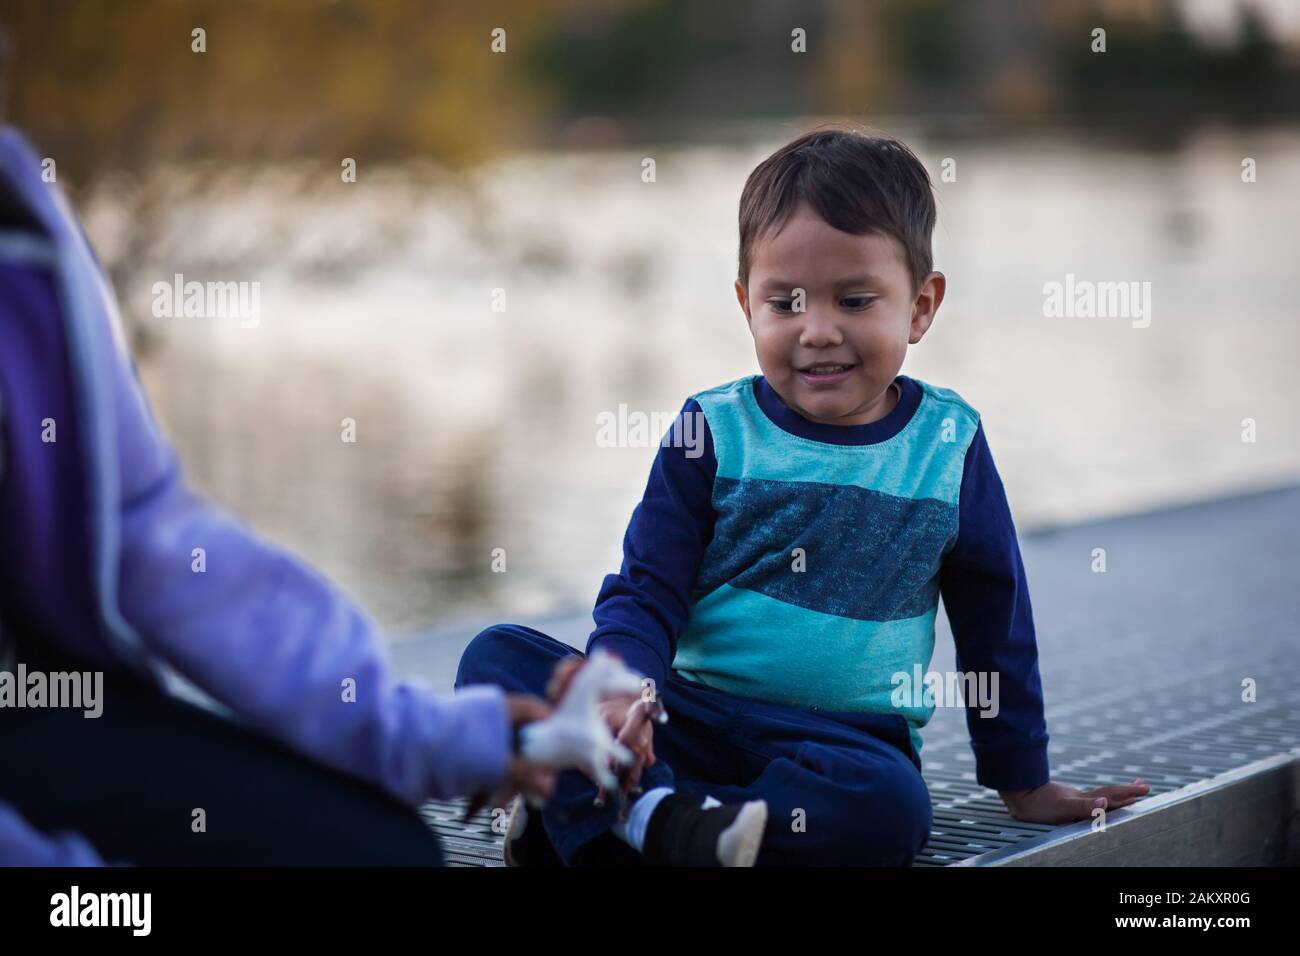 A little brother is playing with his older sister while sitting on the docks of a lake. Stock Photo